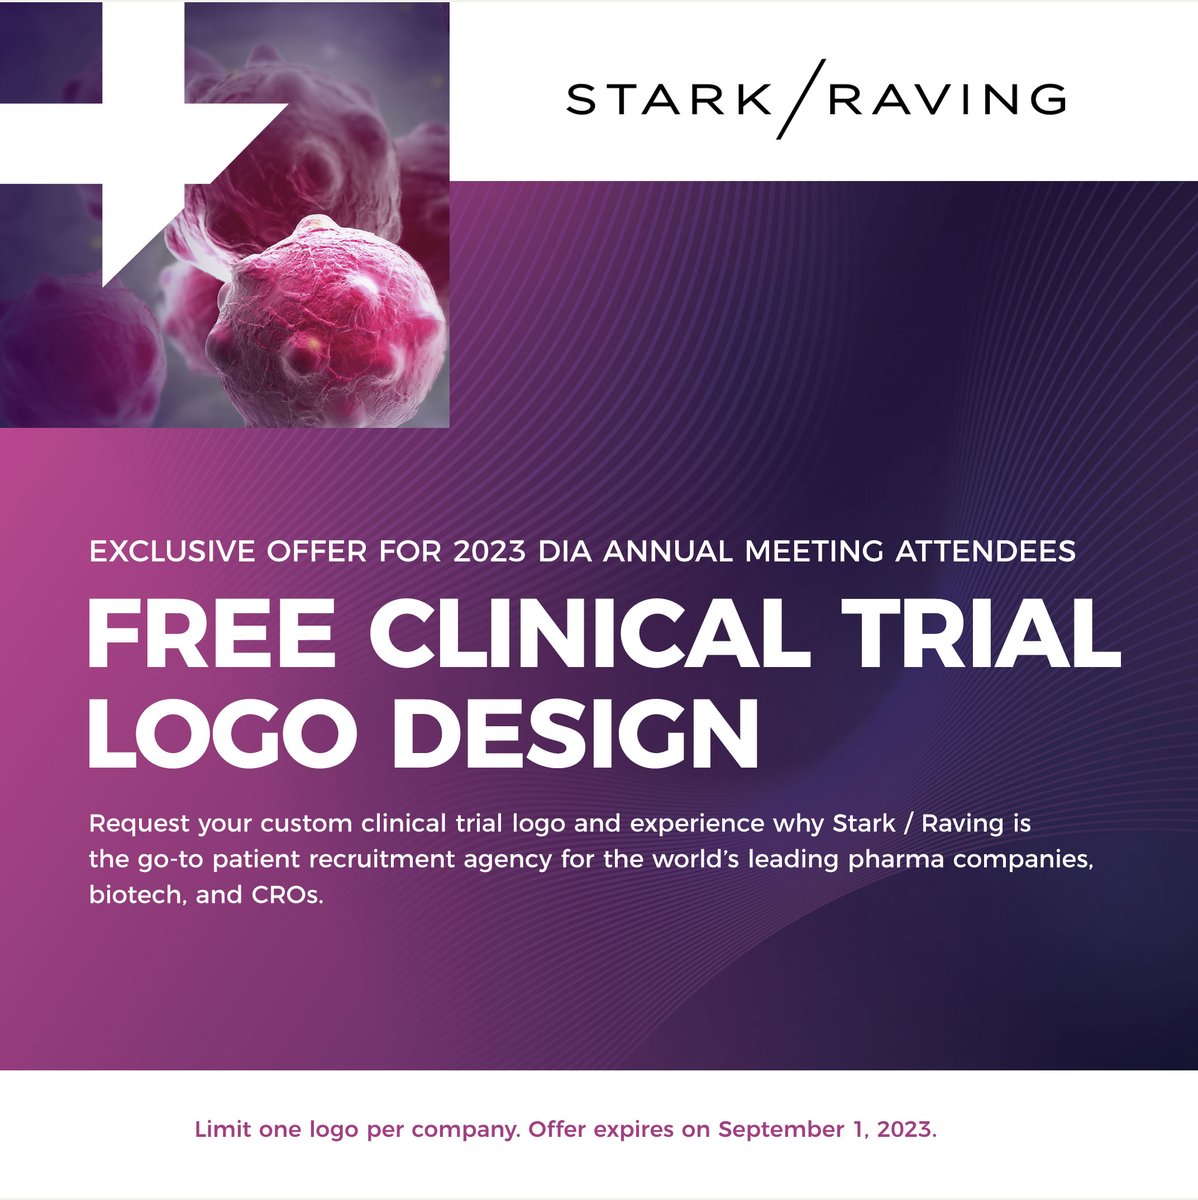 #DIA2023 Exclusive Offer: What better way to see how Stark / Raving accelerates patient enrollment for clinical trials than to experience it for yourself? Visit tinyurl.com/3rteuy4y to request your FREE Clinical Trial Logo Design.
#patientrecruitment #clinicalresearch